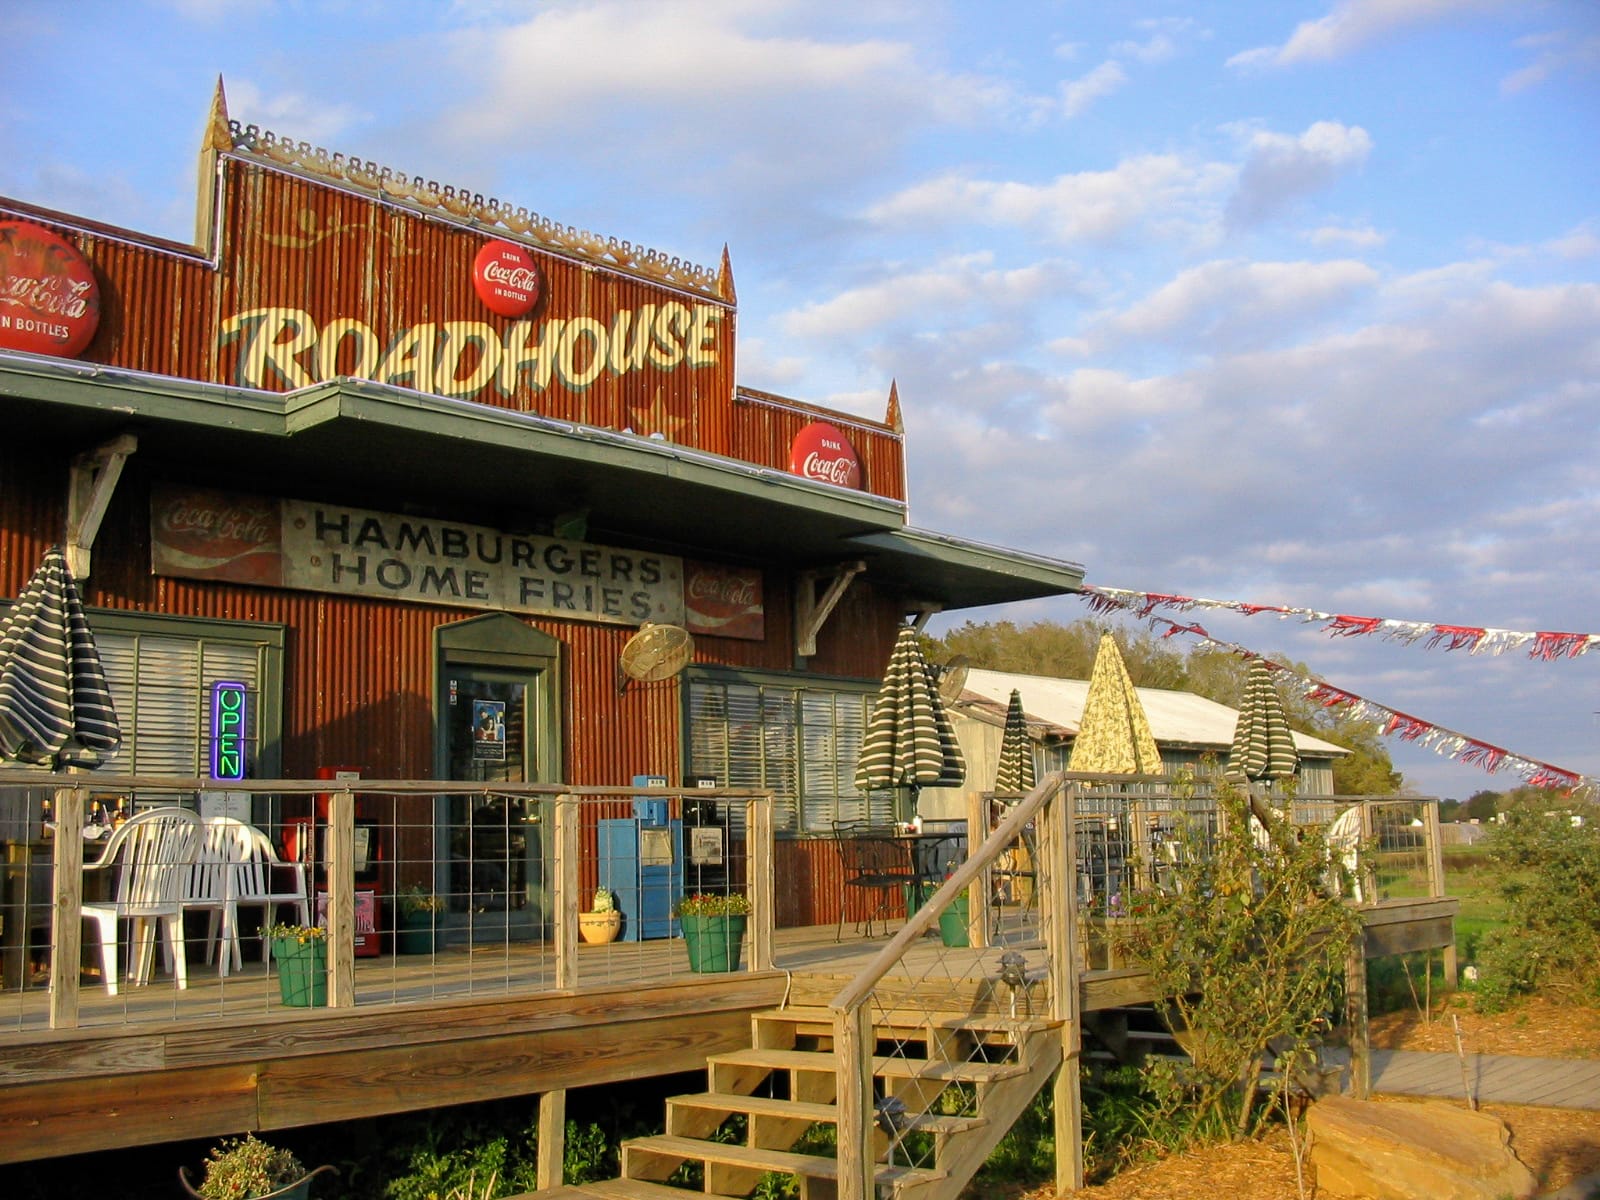 The Roadhouse, home of a decent dinner